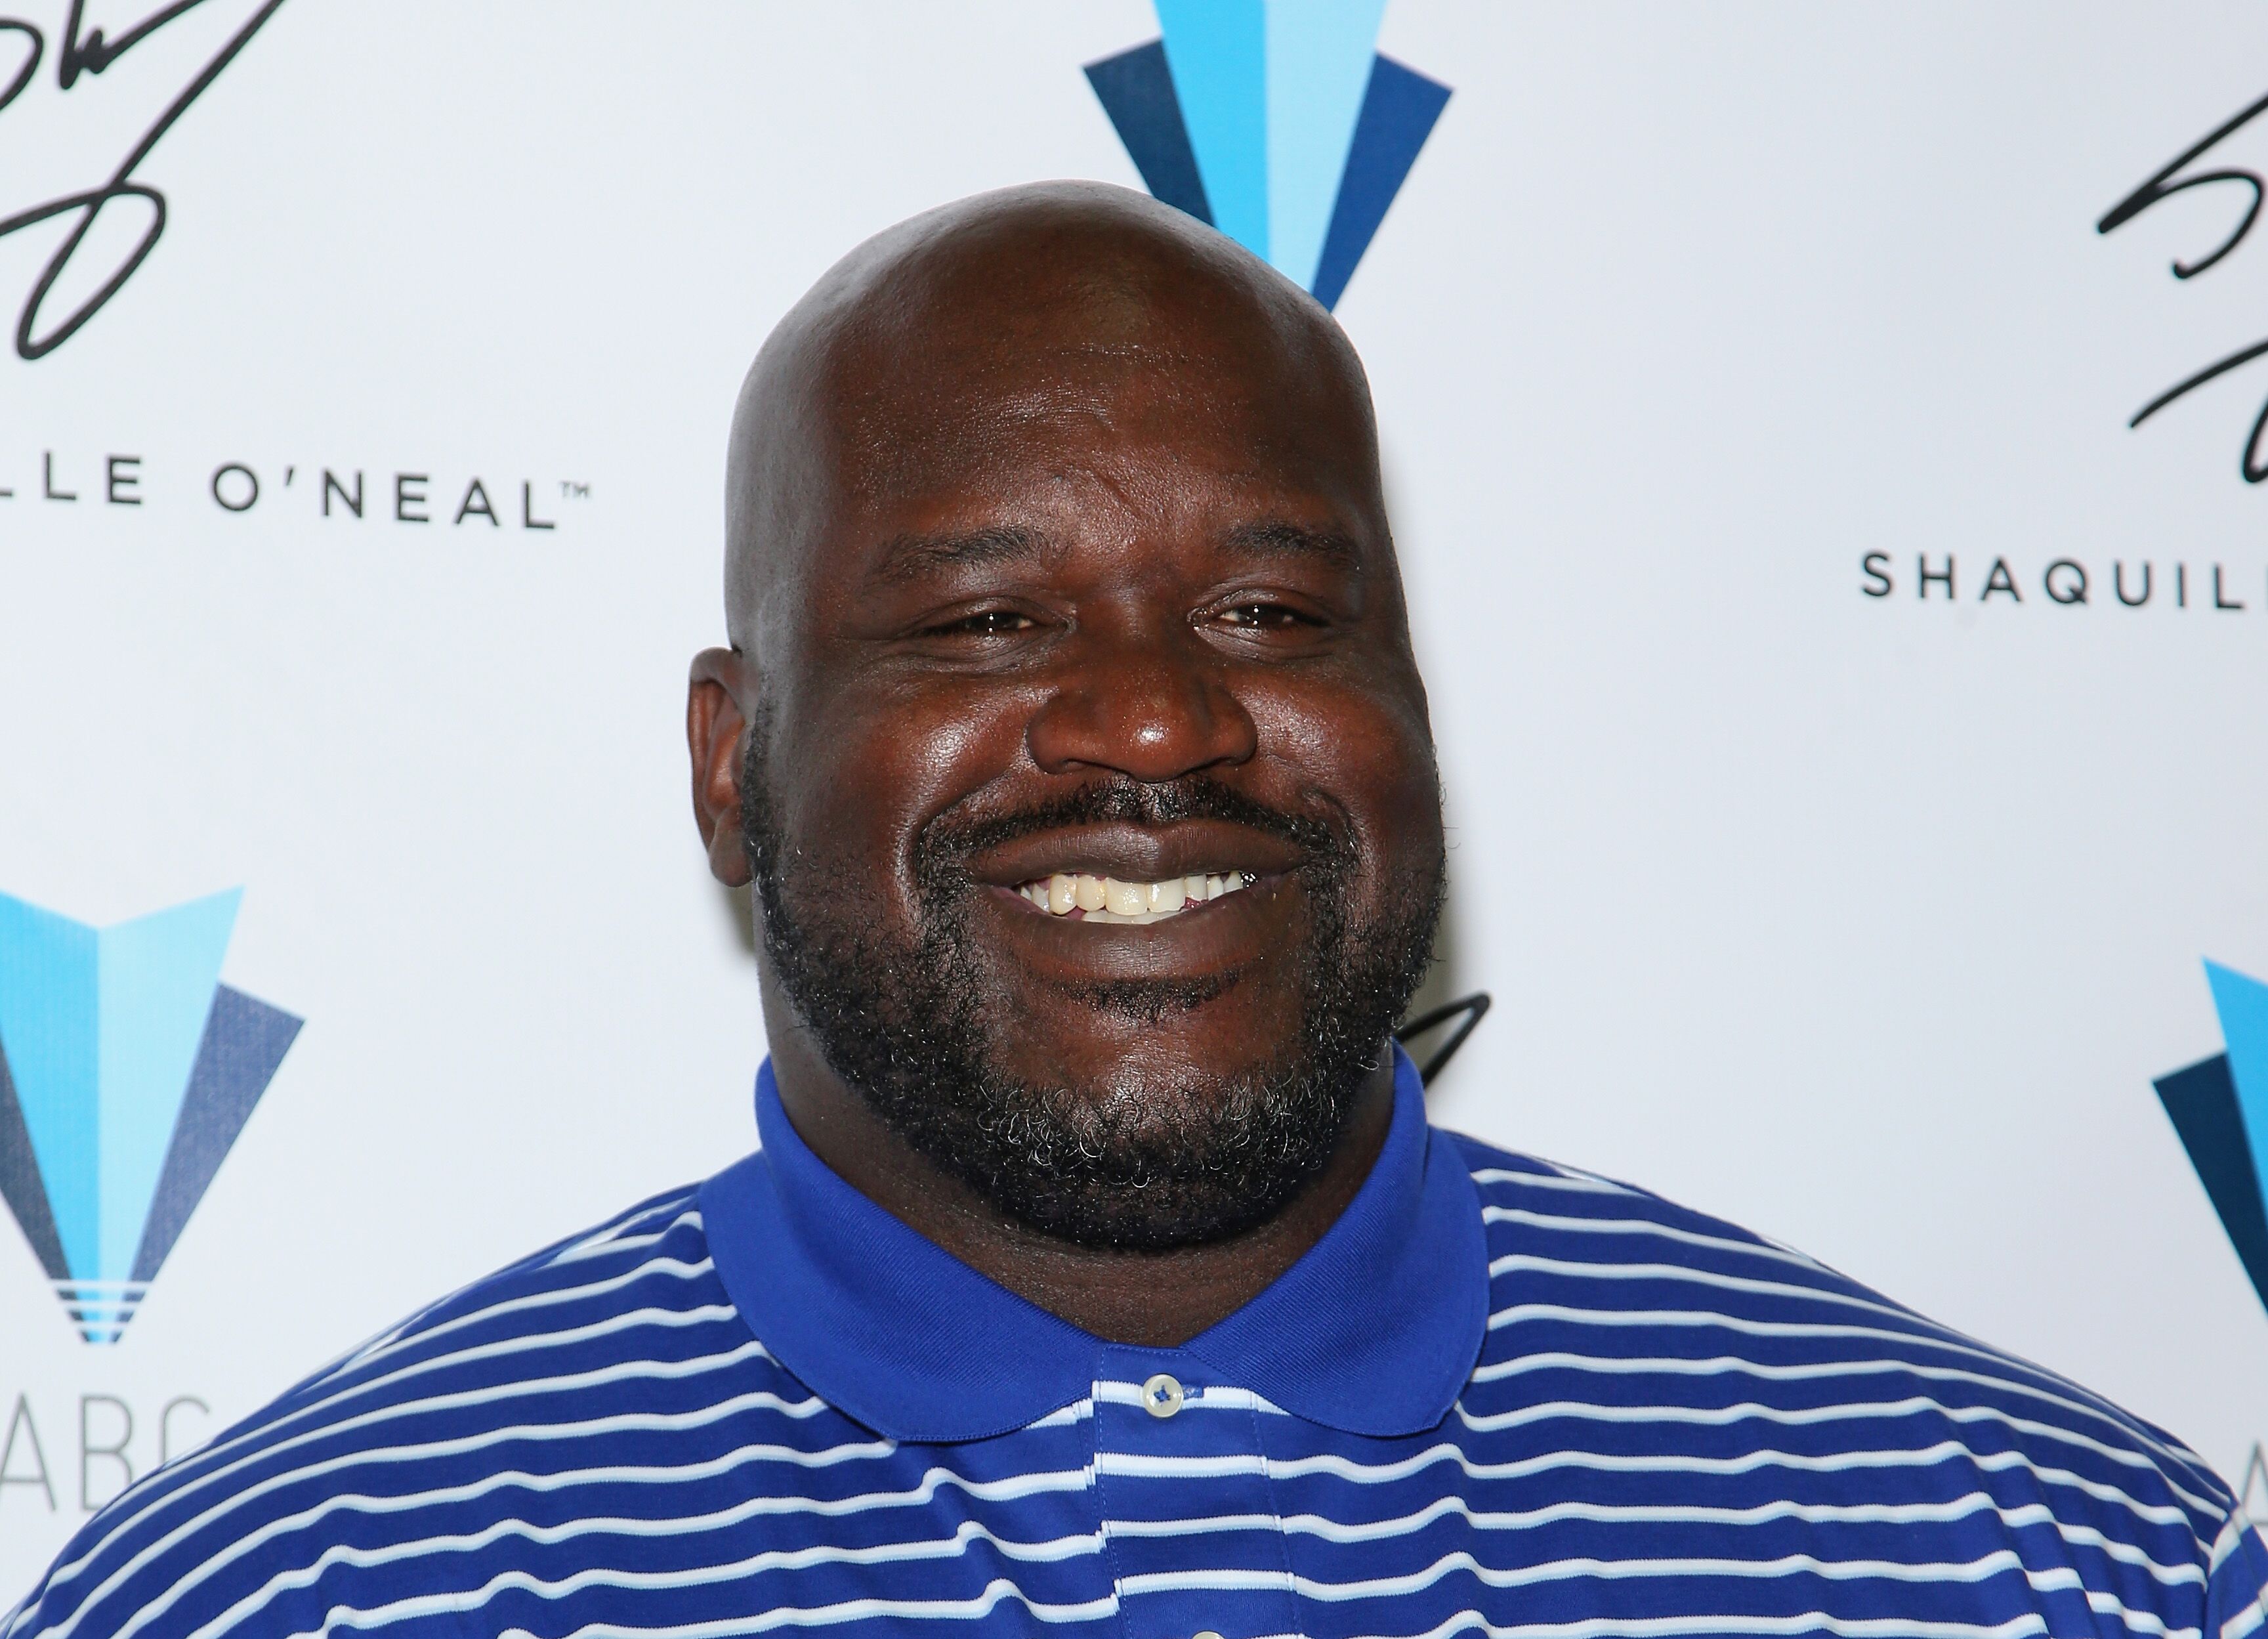 Shaquille O'Neal poses in the Authentic Brands Group booth during the Licensing Expo. | Source: Getty Images 